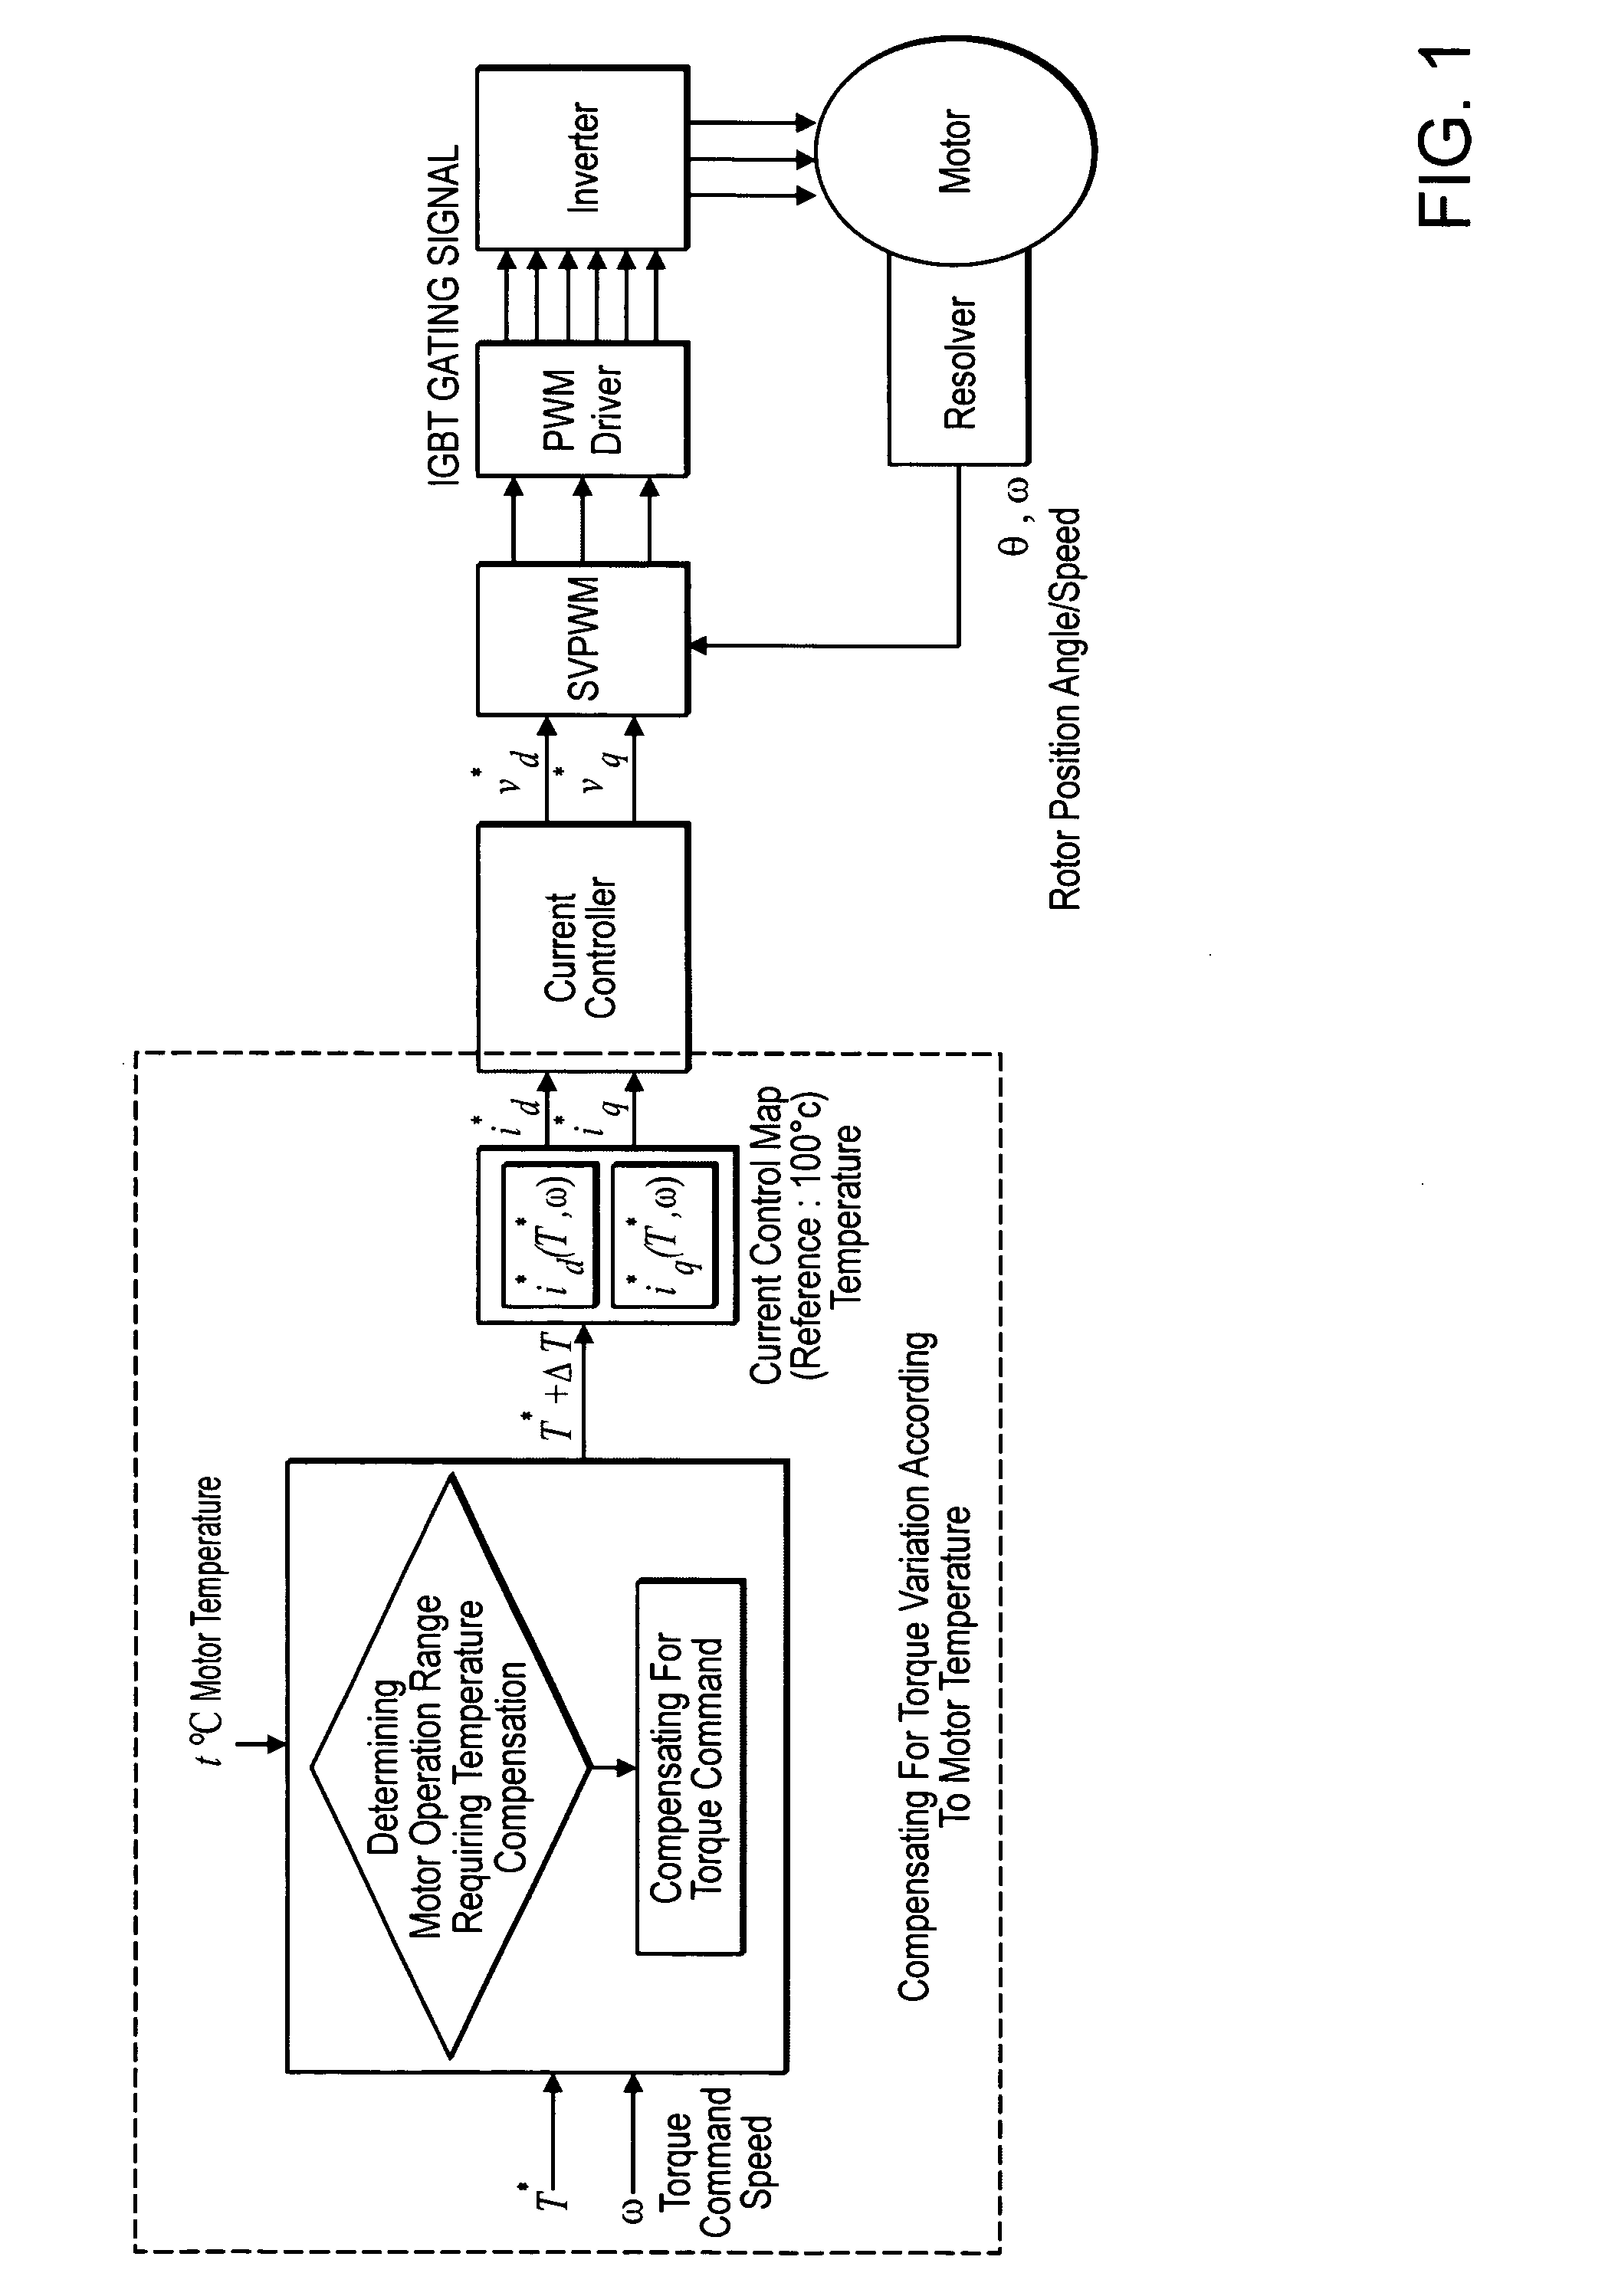 Method for controlling motor torque in hybrid electric vehicle